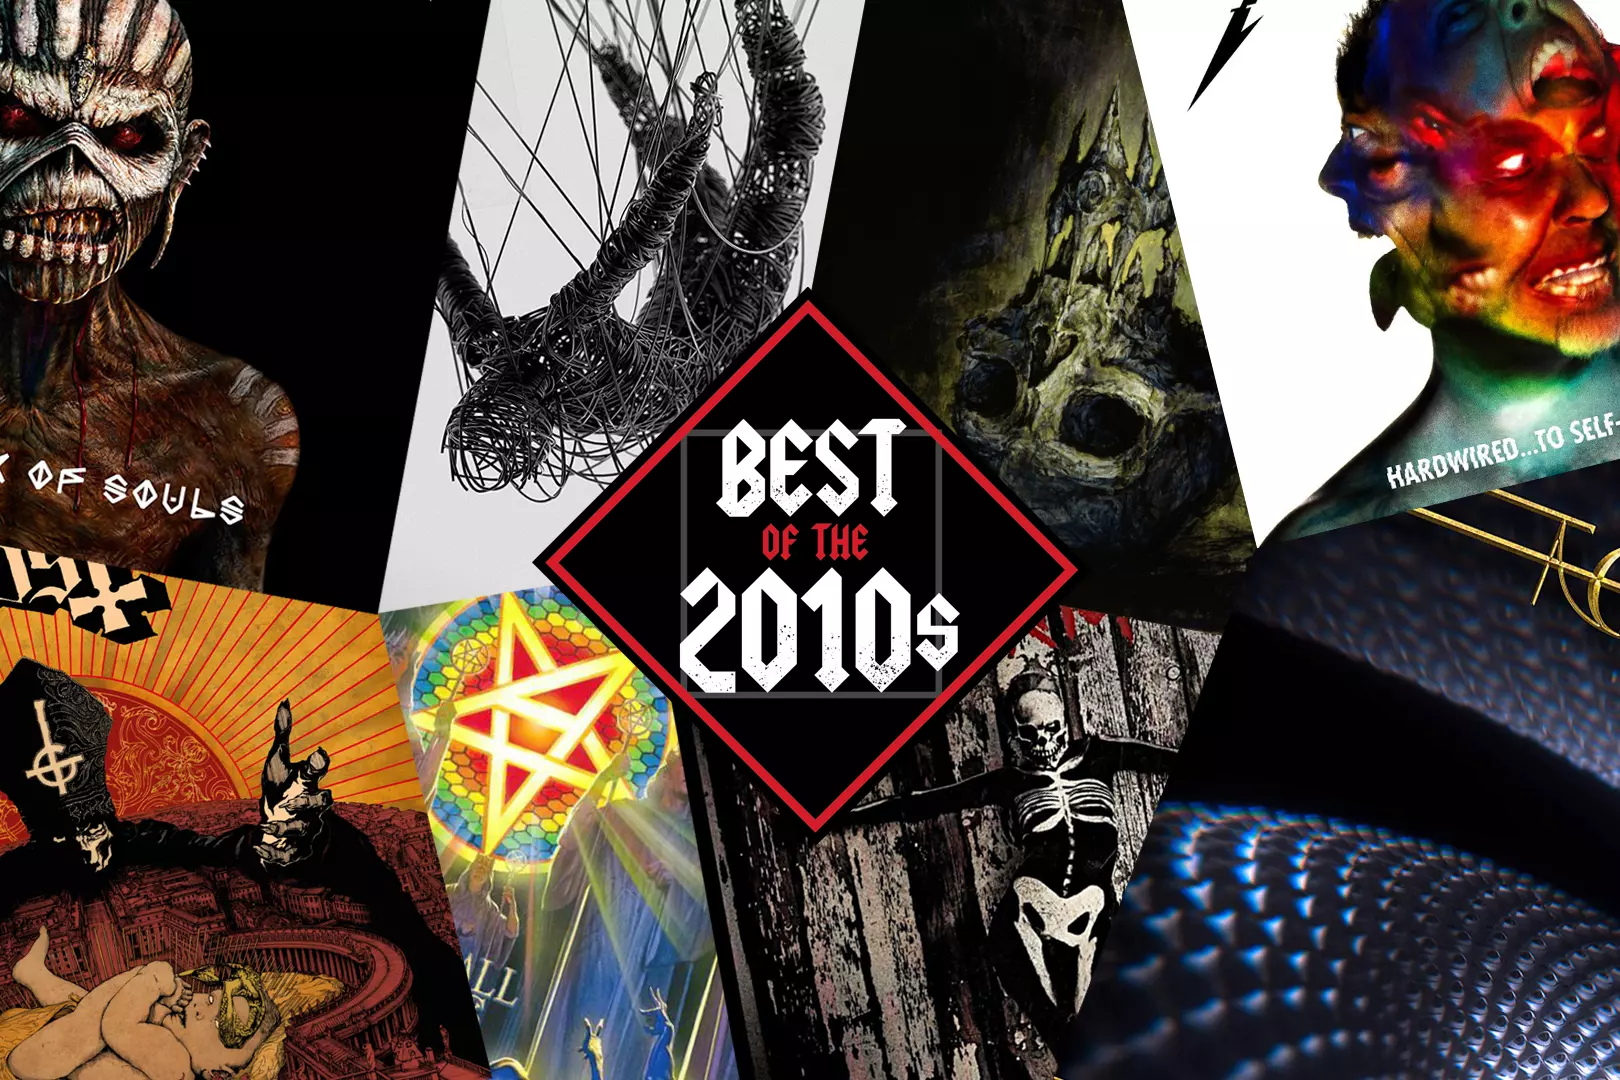 The 18 Best Metal Songs of the Decade